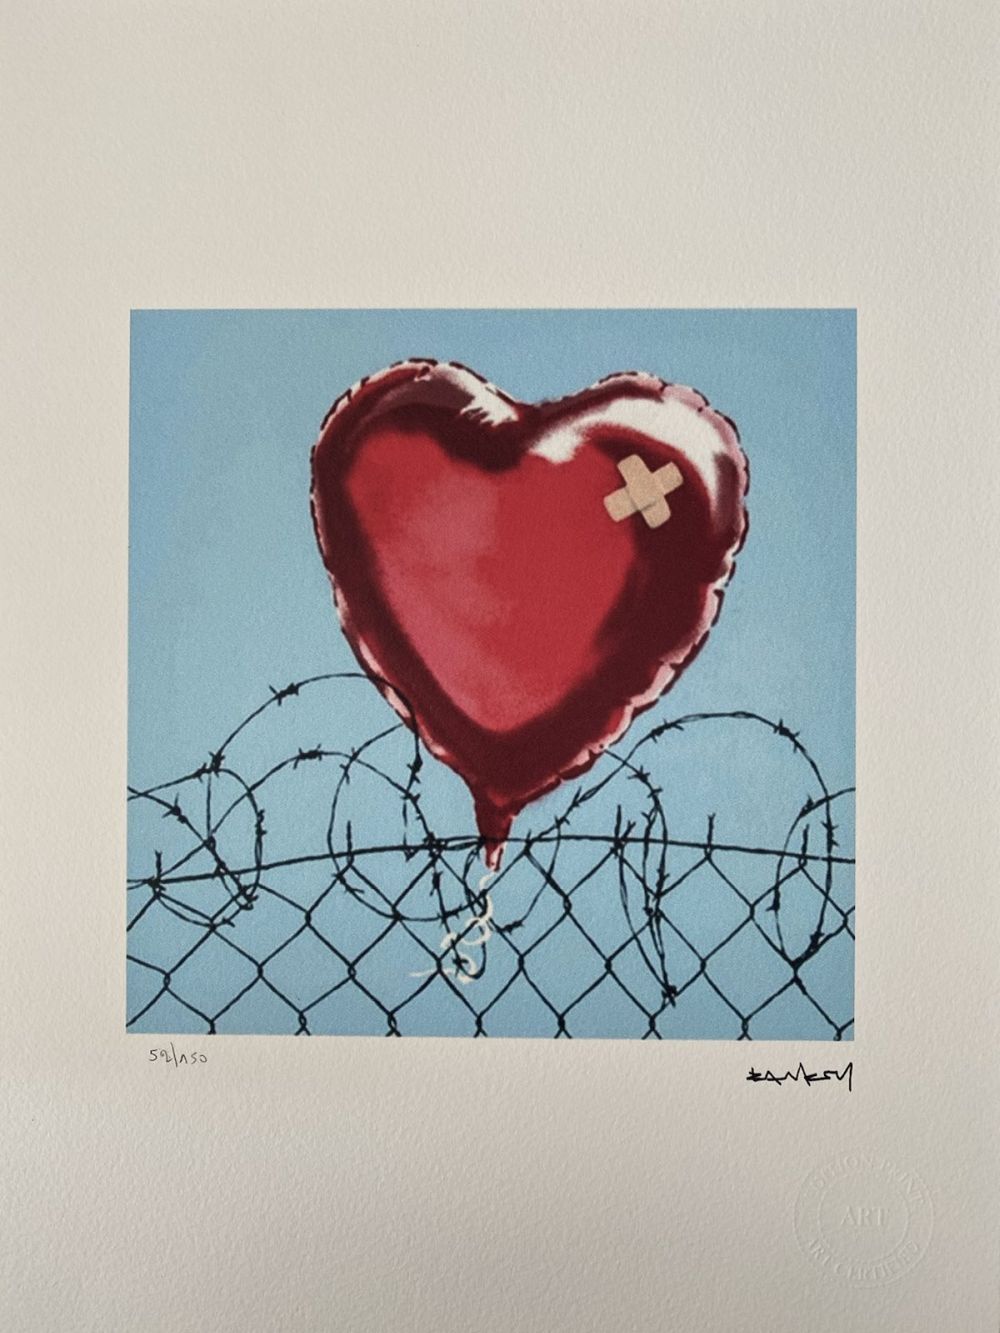 Banksy (after) - Love Hurts Banksy (after) - Love Hurts



Color lithograph on A&hellip;